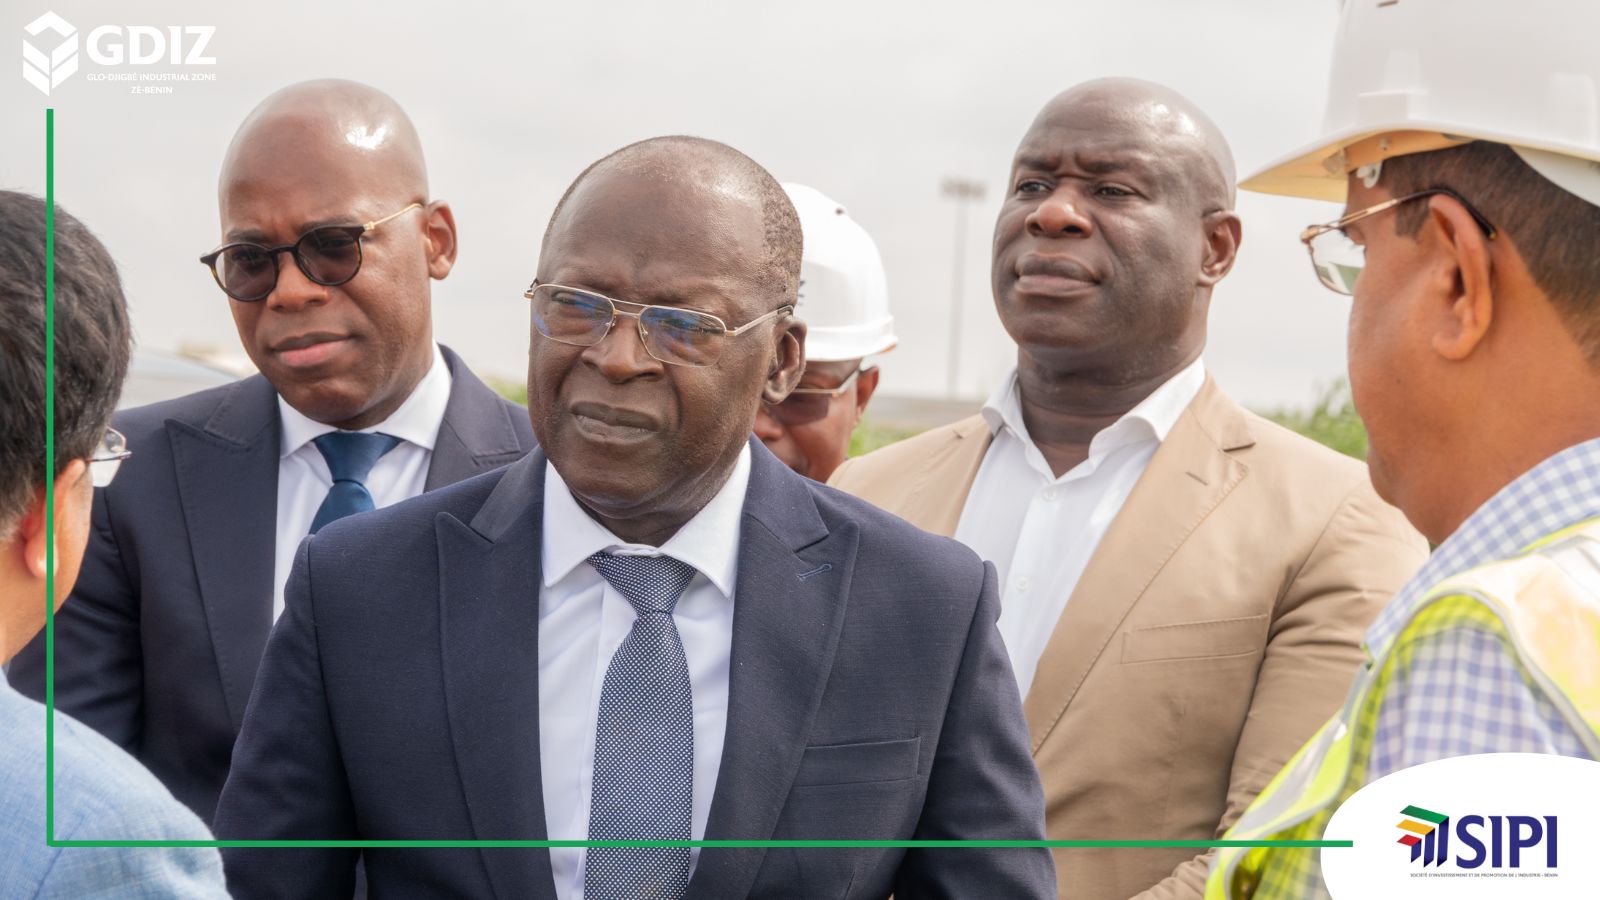 On 29 June 2022, GDIZ received Mr Abdoulaye Bio Tchané, Benin's Minister of State for Development and Coordination of Government Action, for a working session.